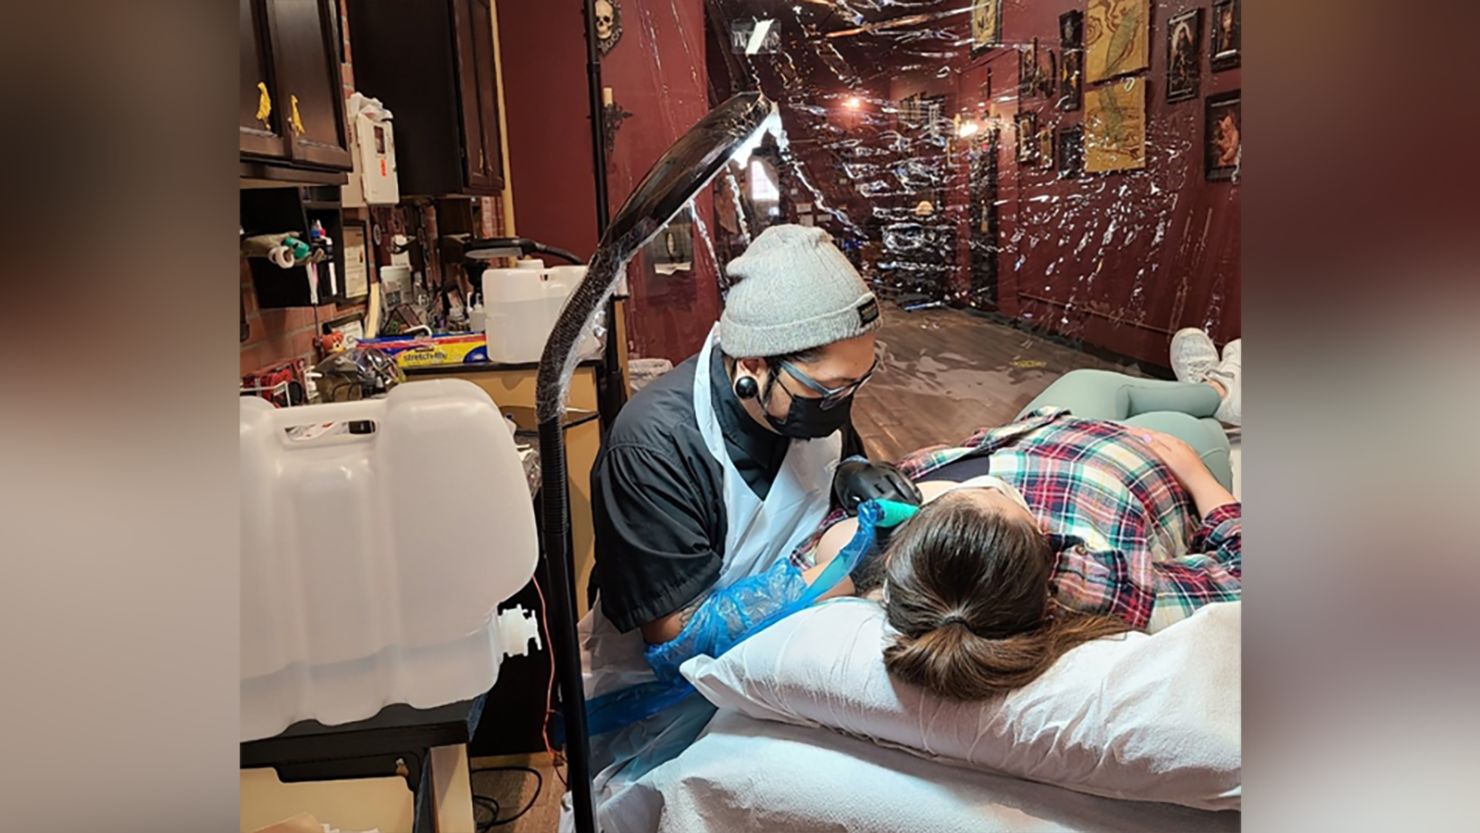 Kayo Sumbillo, an artist at Black Raven Tattoo in California, tattoos a client in the midst of the Covid-19 pandemic. 